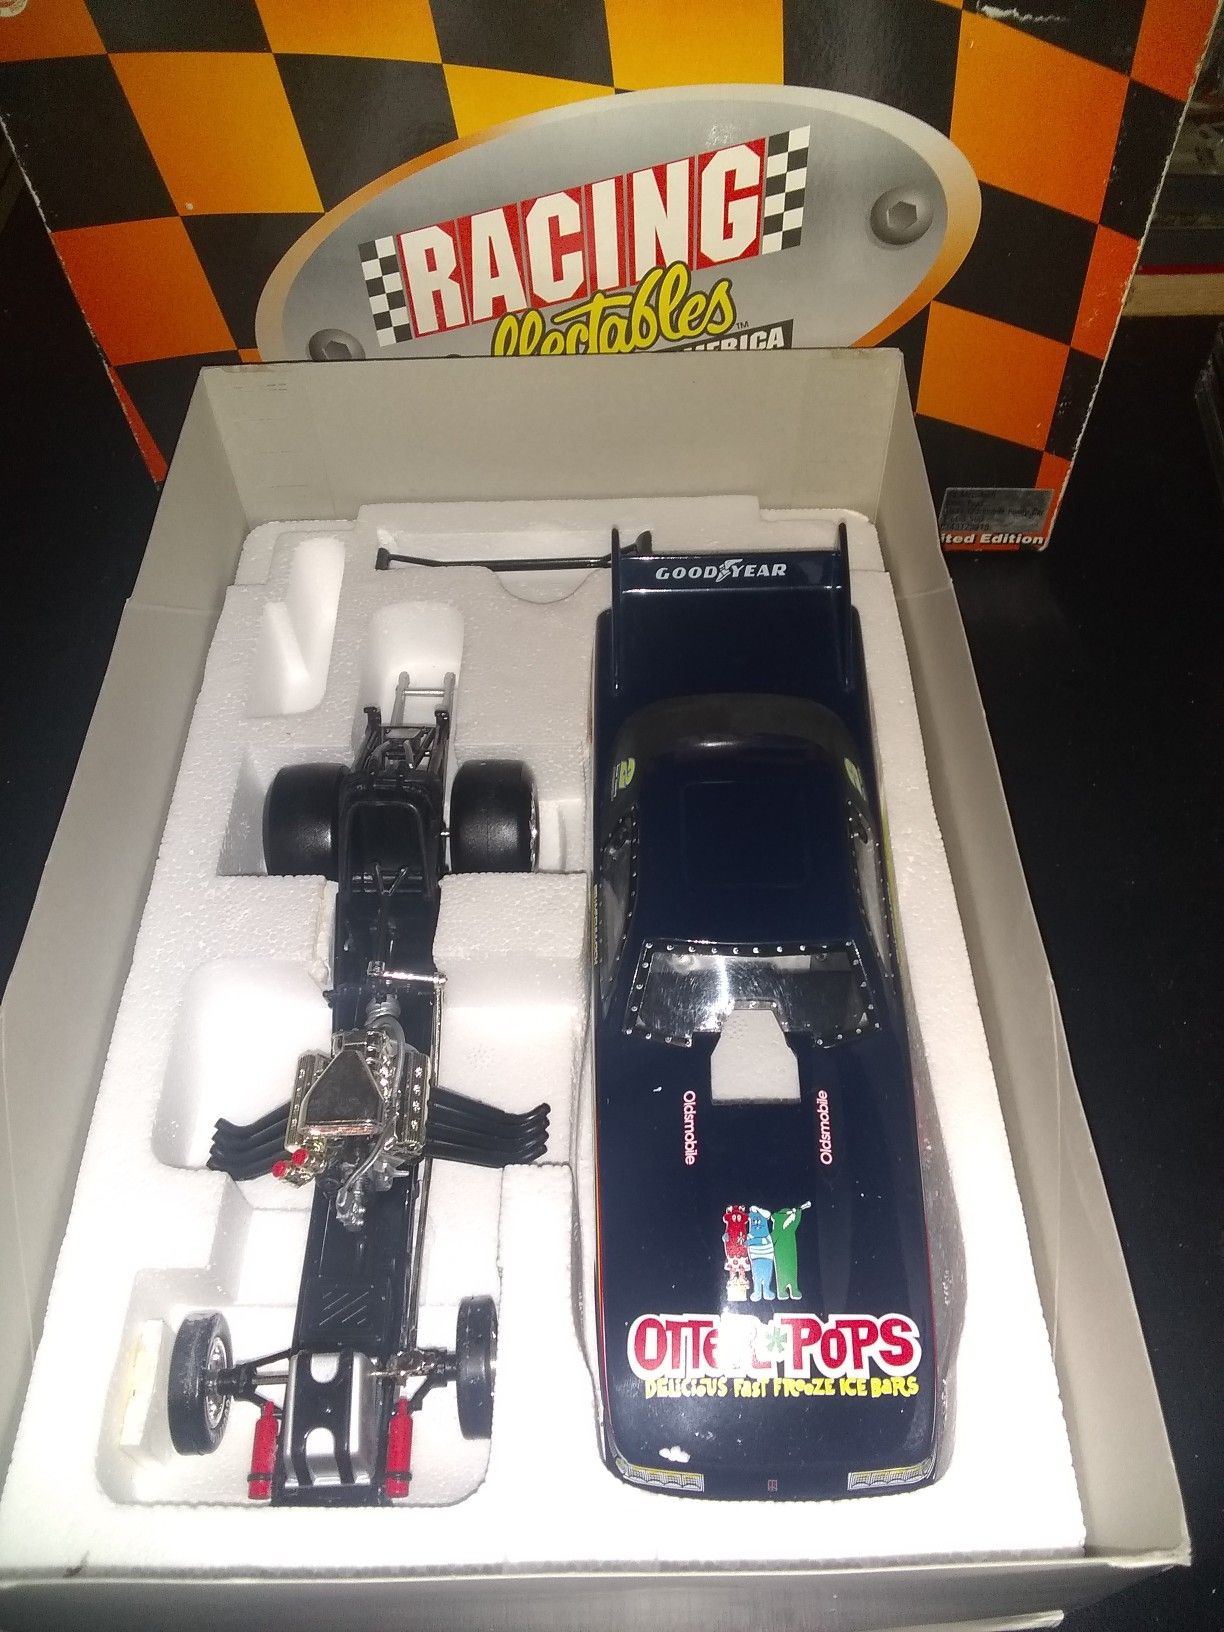 Racing Collectibles Club of America Ed Mcculloch Otter pops 1/24 1991 Oldsmobile Funny Car